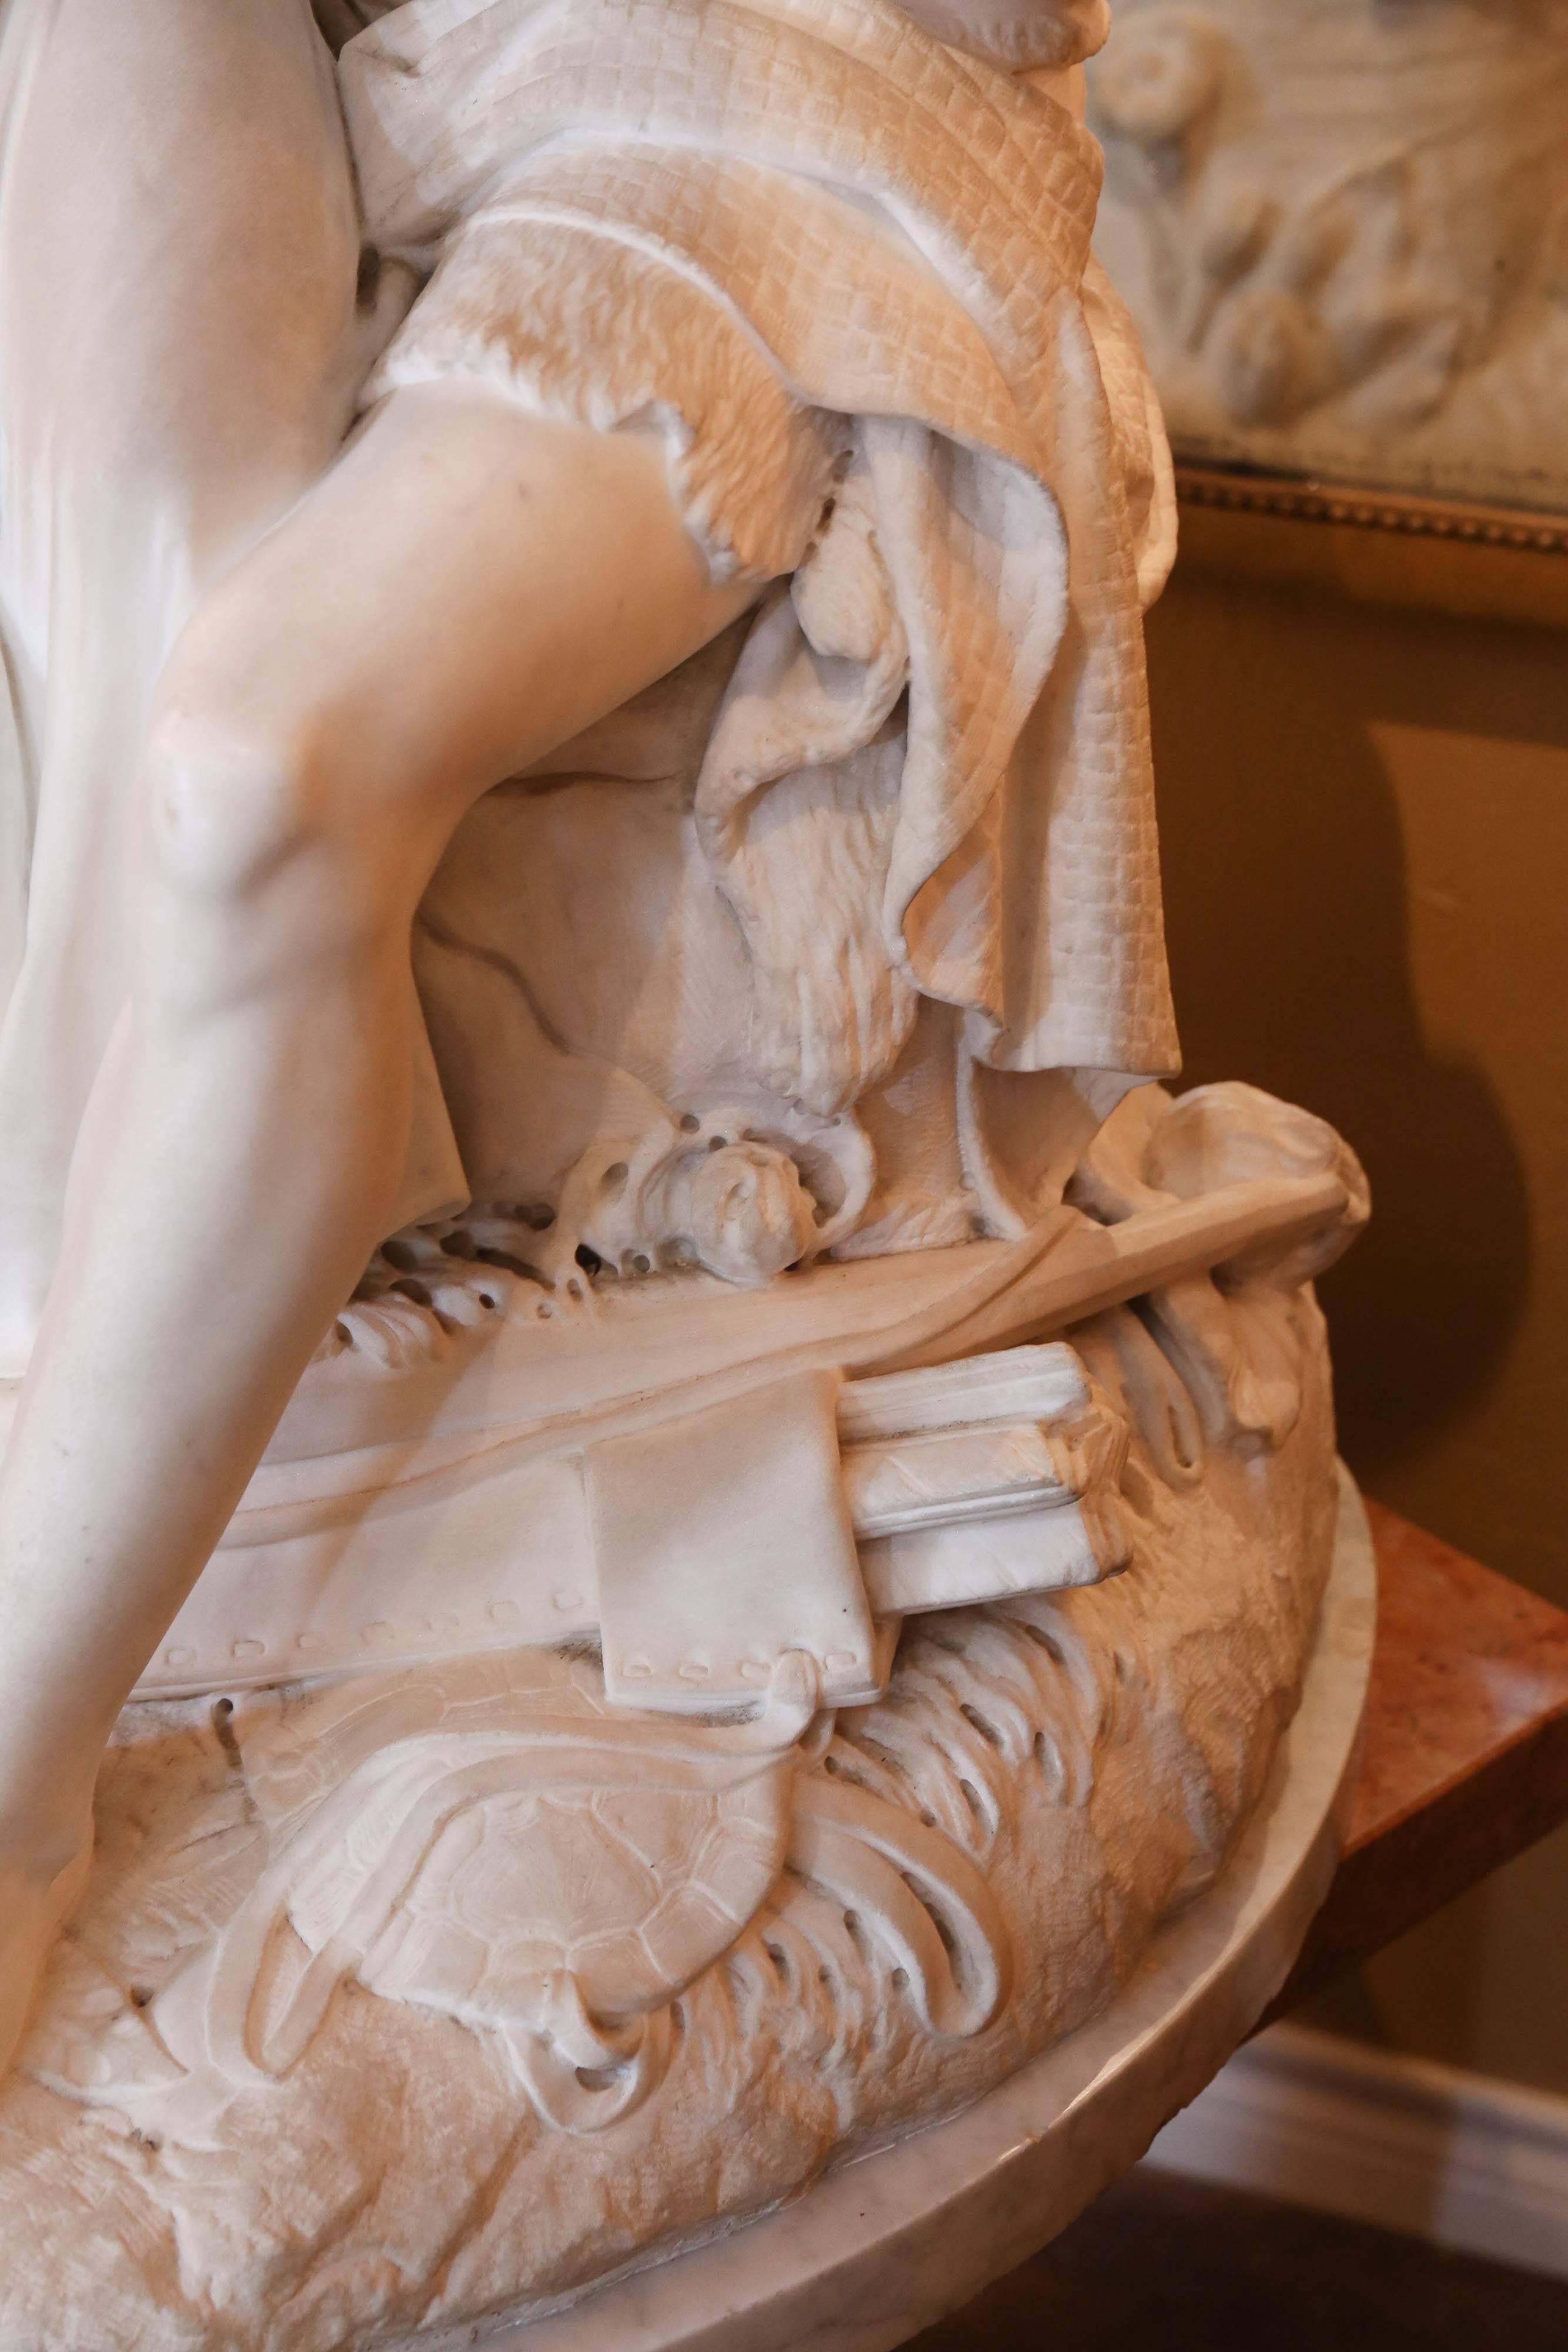 Italian Large-Scale Marble Sculpture of Two Figures Embracing by the Sculptor Turini